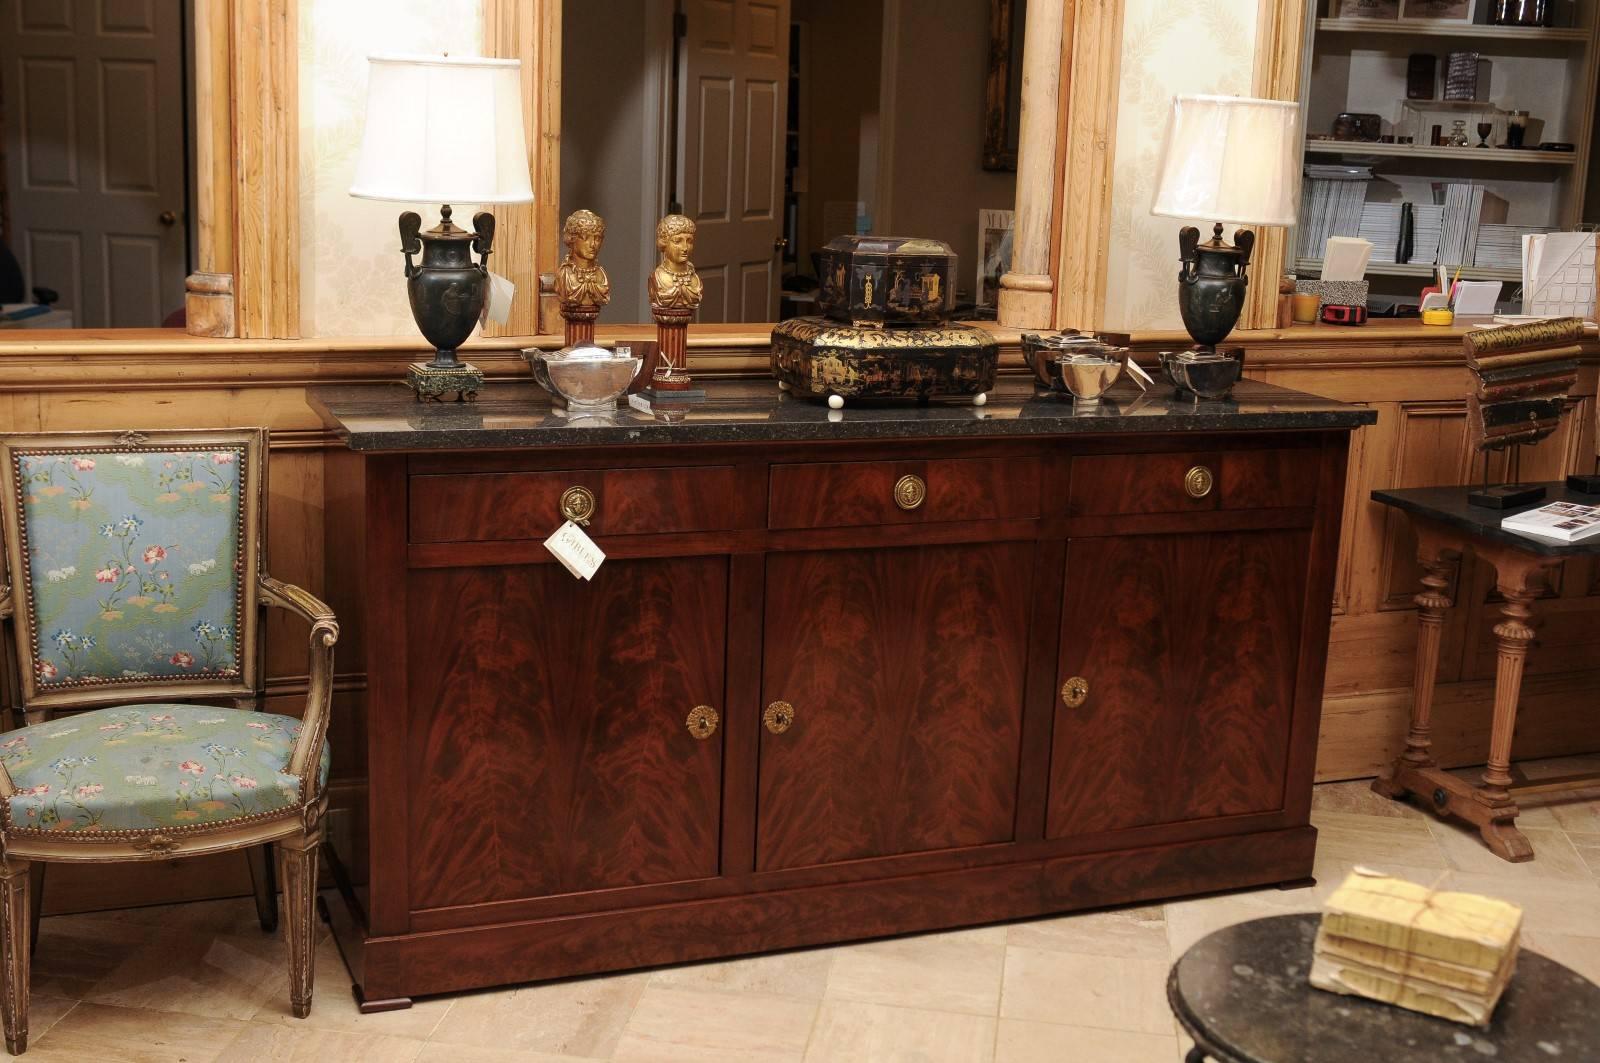 19th century mahogany Empire style Enfilade with marble top, circa 1880

One can't help but appreciate the craftsmanship required to create the beautiful mahogany book matched veneer on this piece. Even the insides of the door are veneered. The